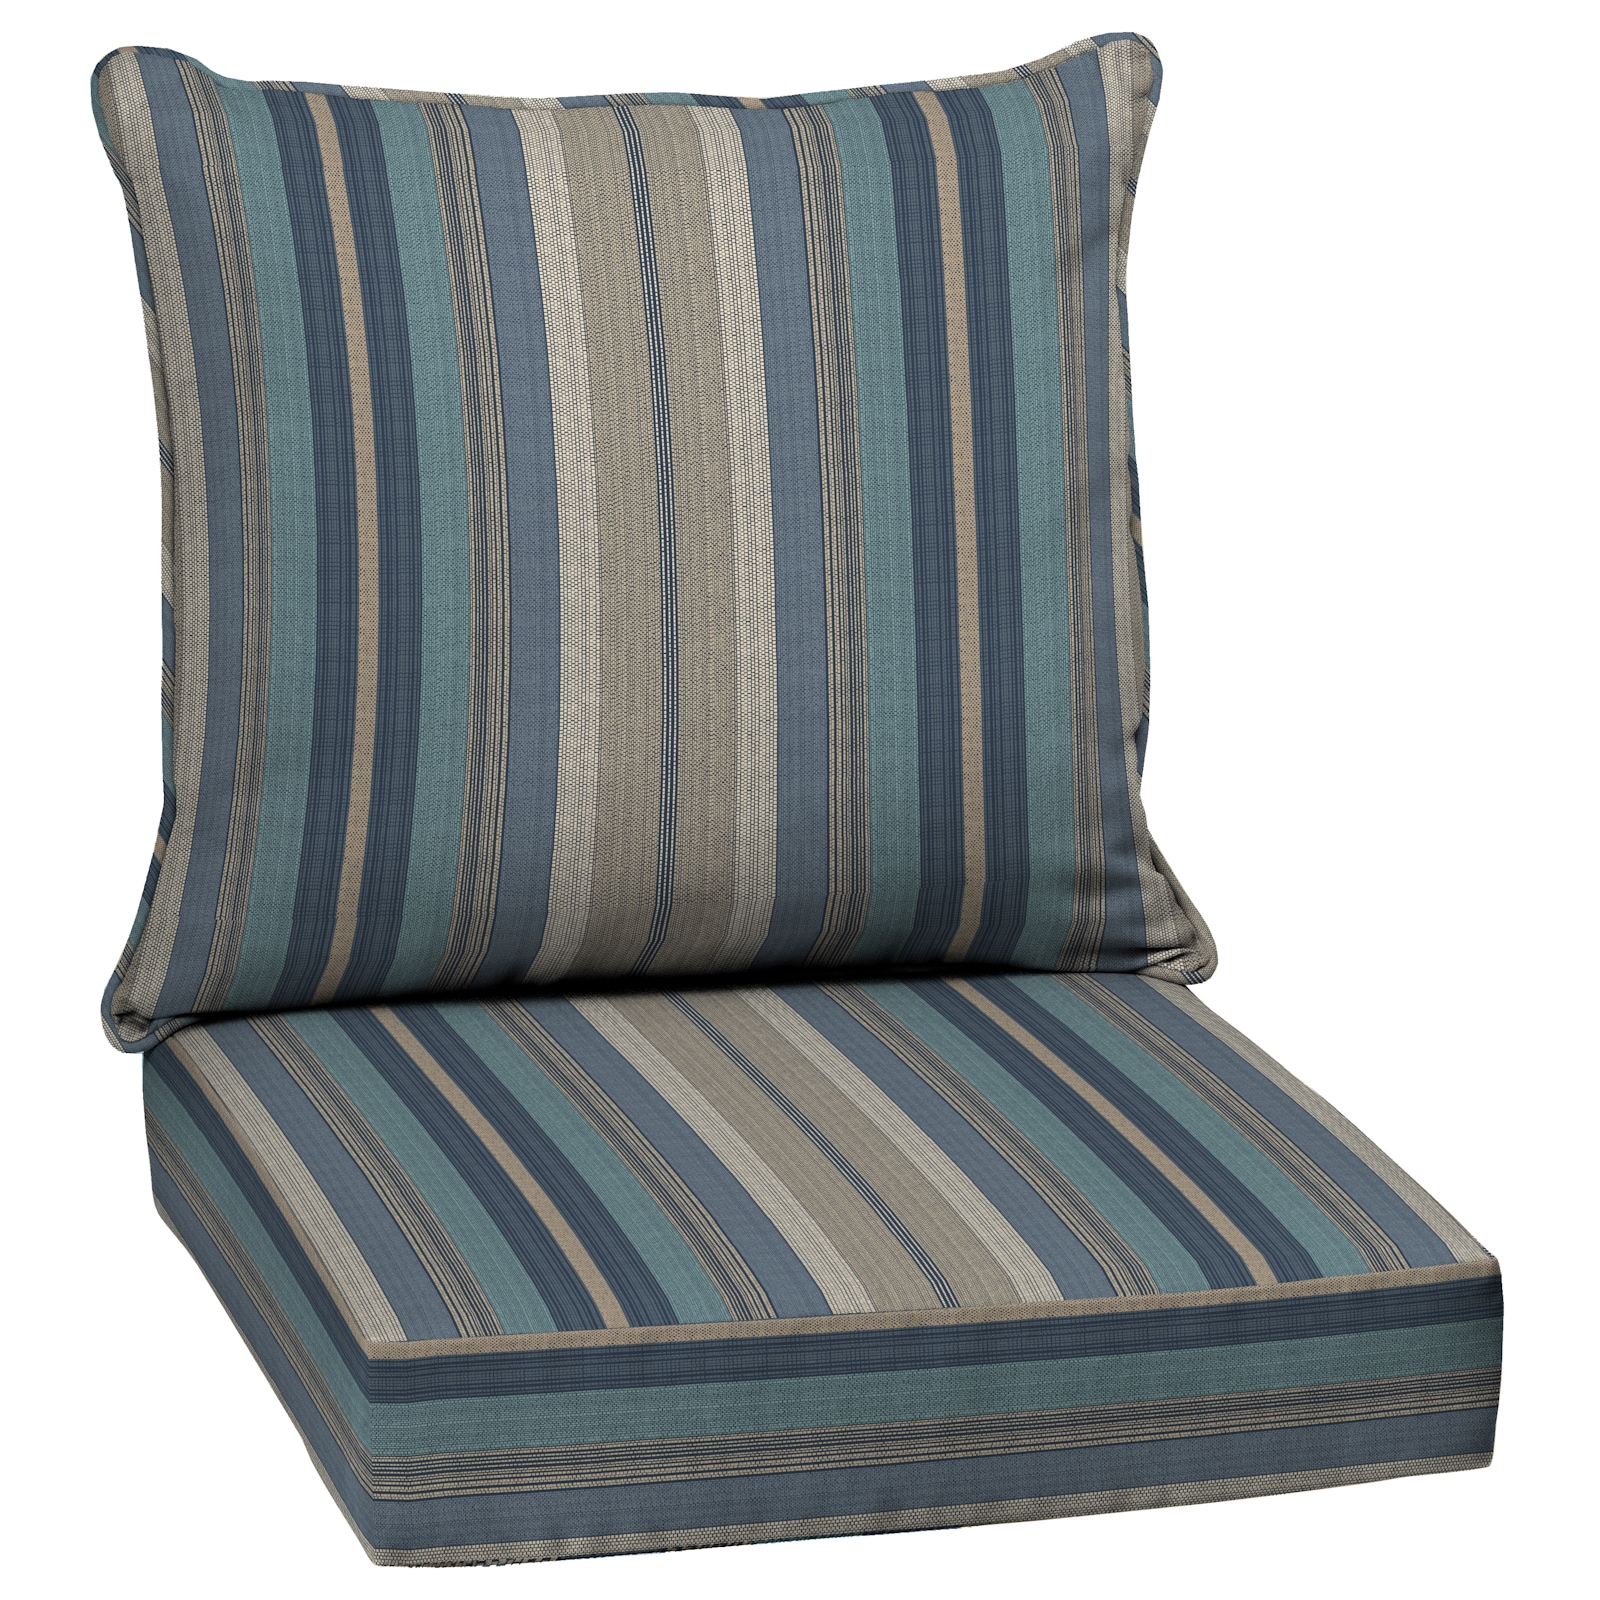 Allen Roth 2 Piece Deep Seat Patio Chair Cushion At Lowes Com